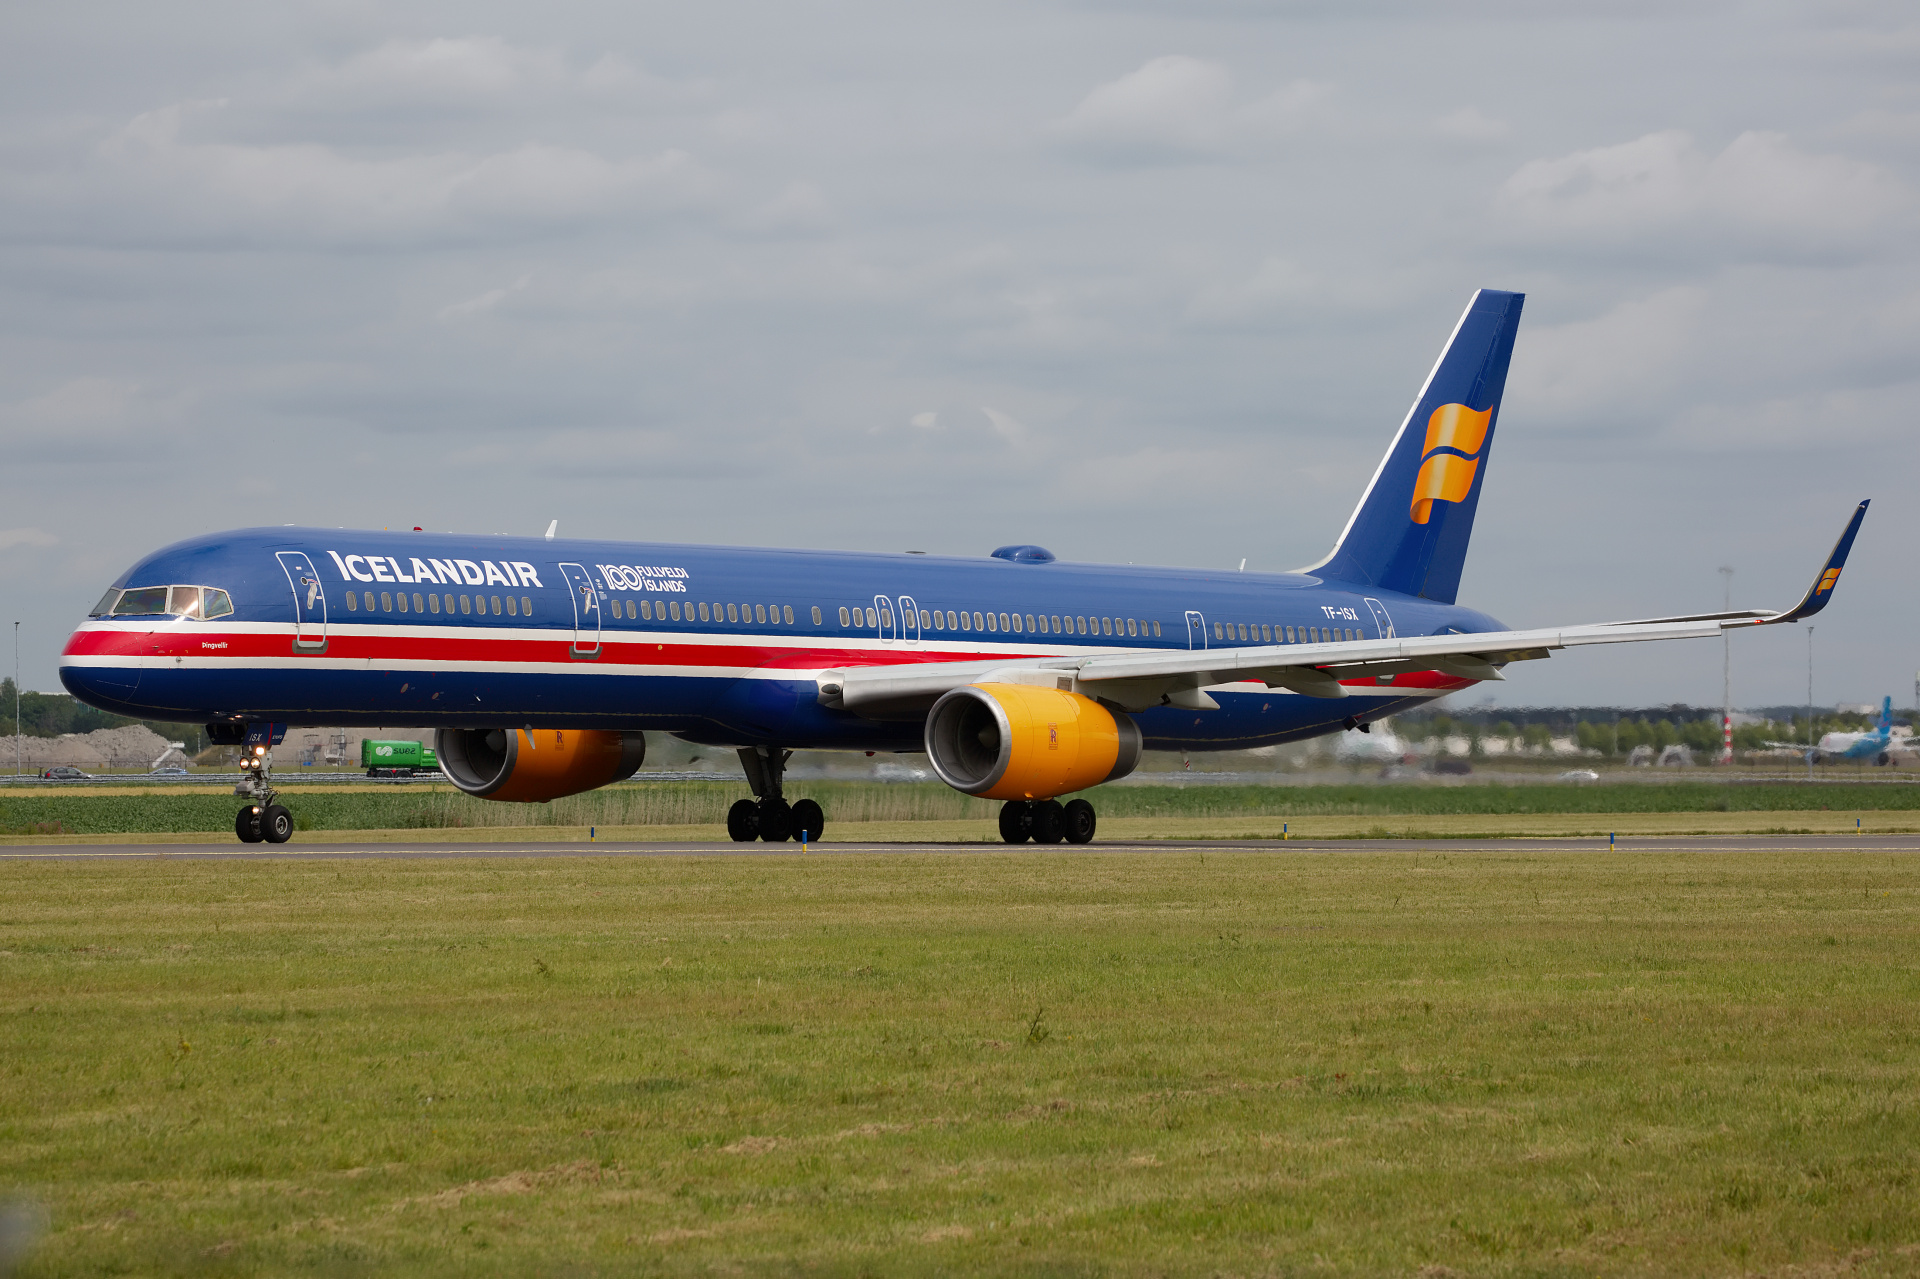 TF-ISX, Icelandair (100 Years Independence livery) (Aircraft » Schiphol Spotting » Boeing 757-300)